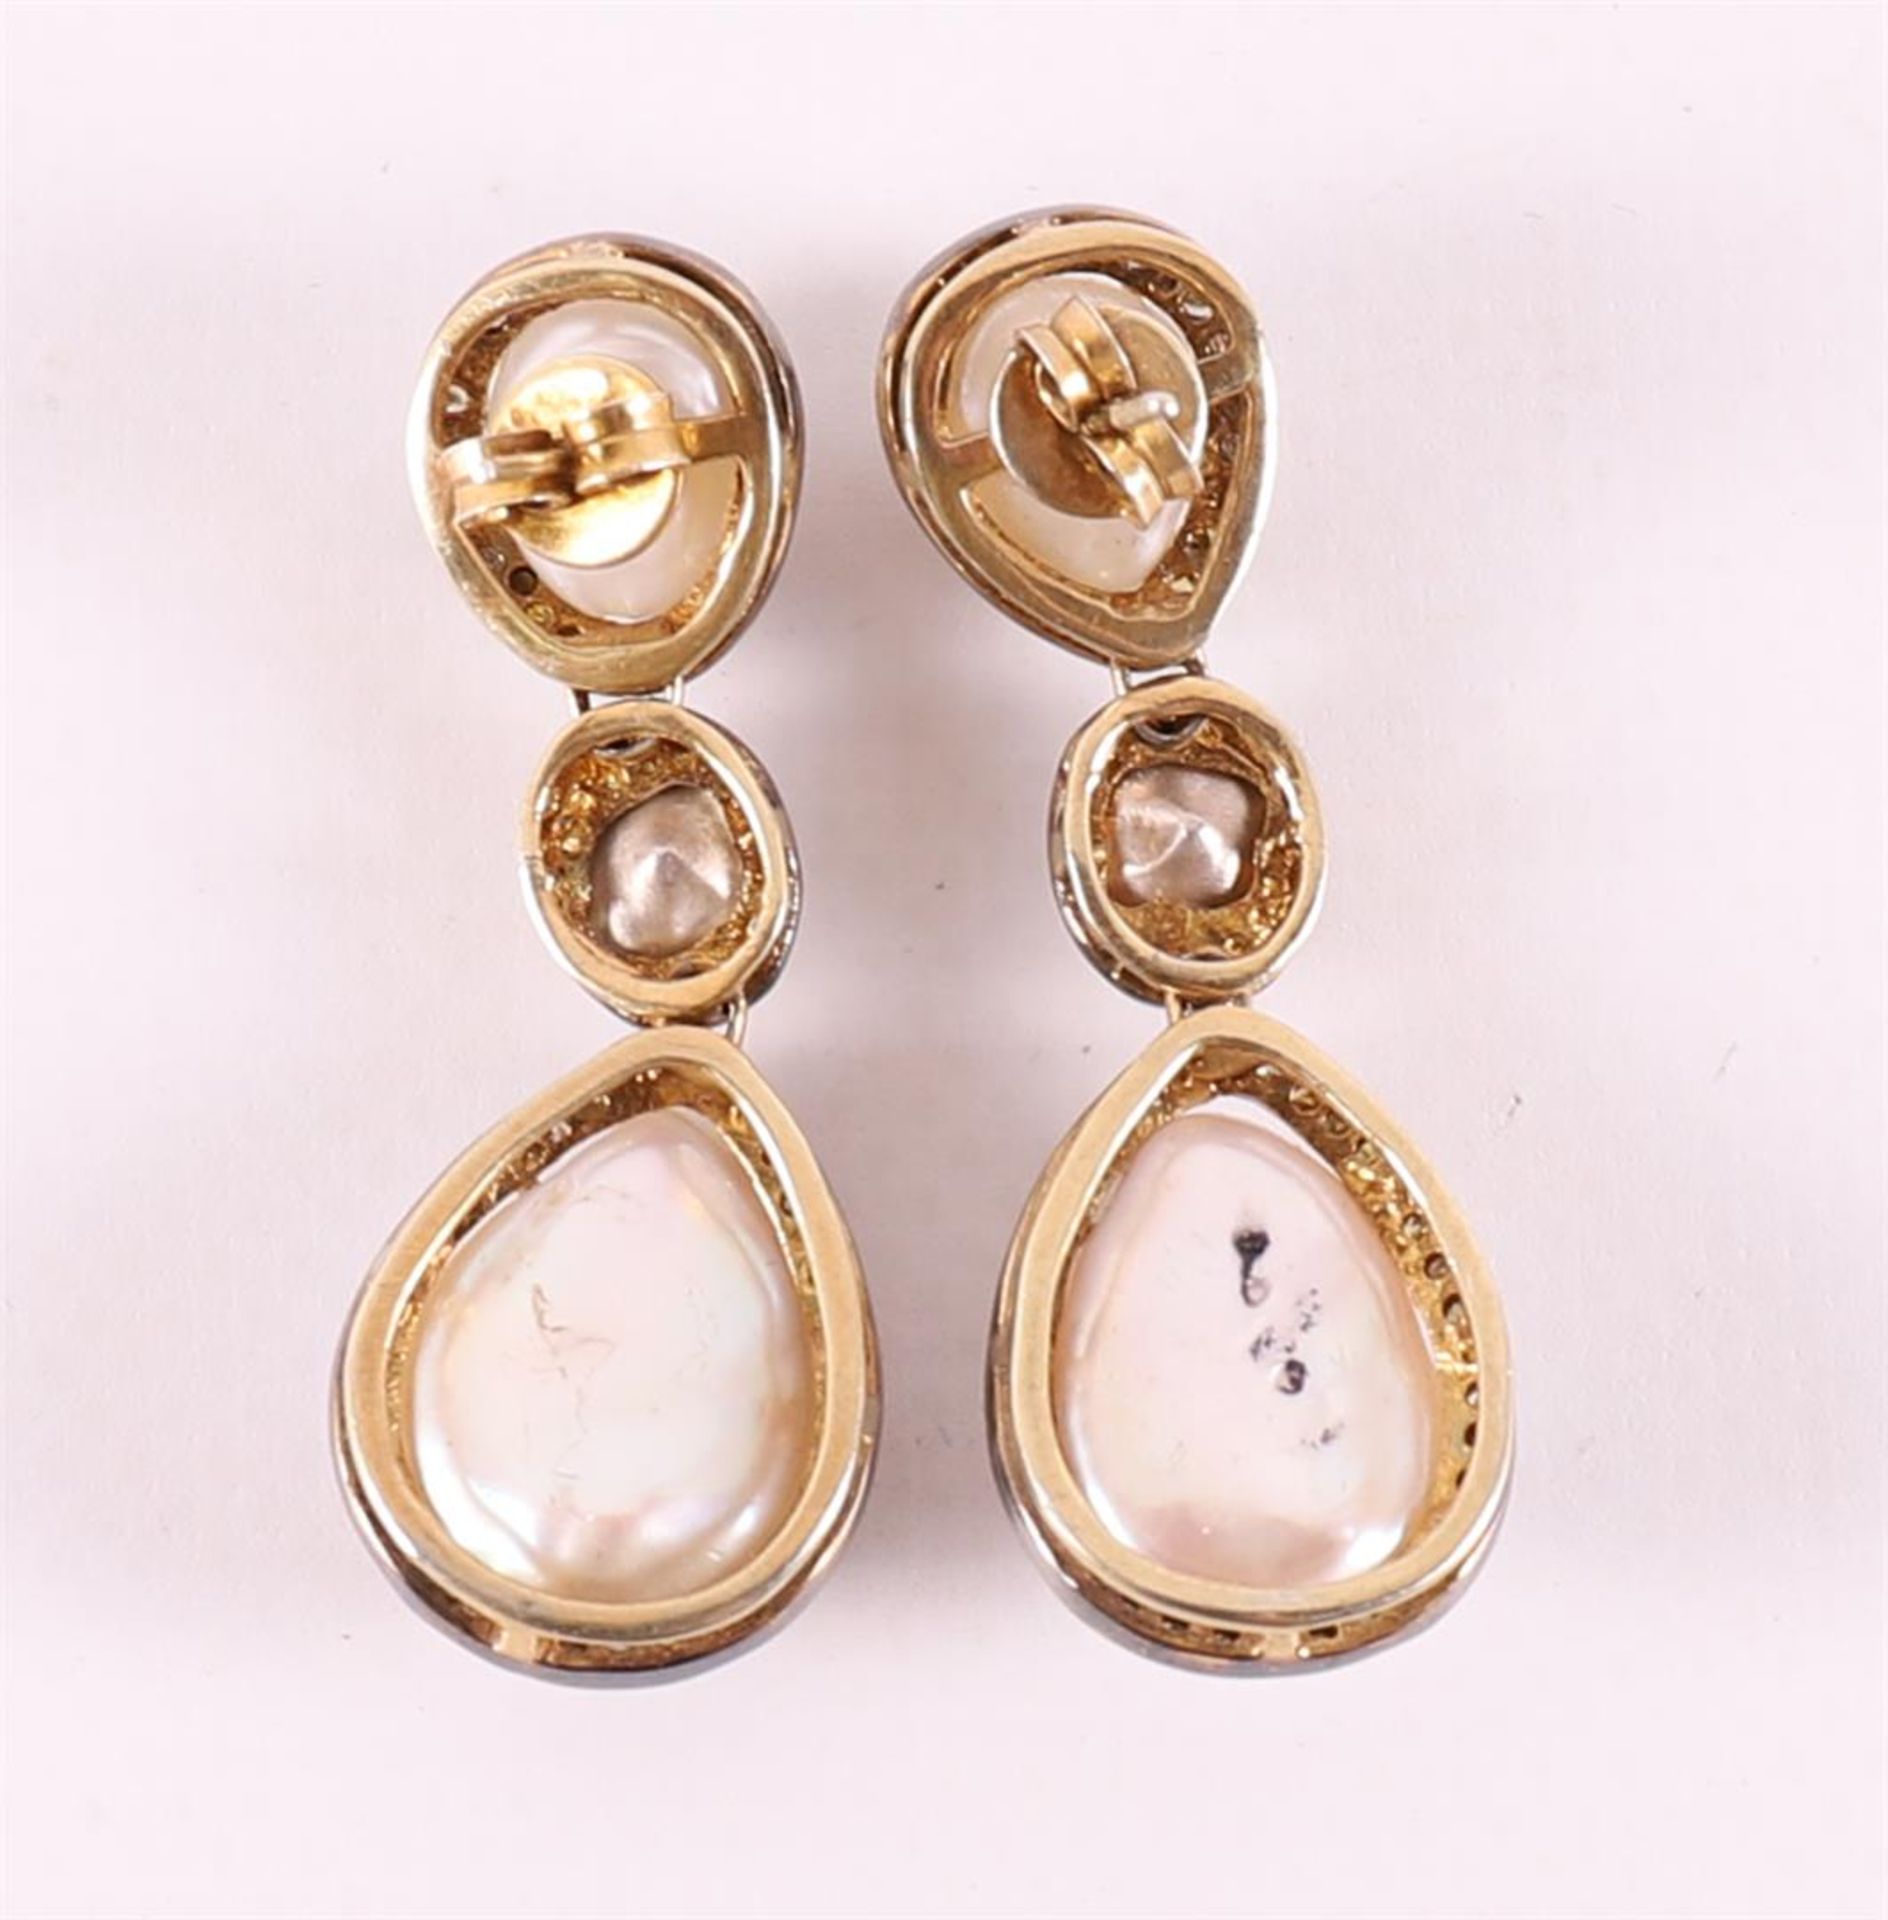 A pair of partly gold-plated silver earrings with 4 pearls, surrounded by diamon - Image 2 of 2